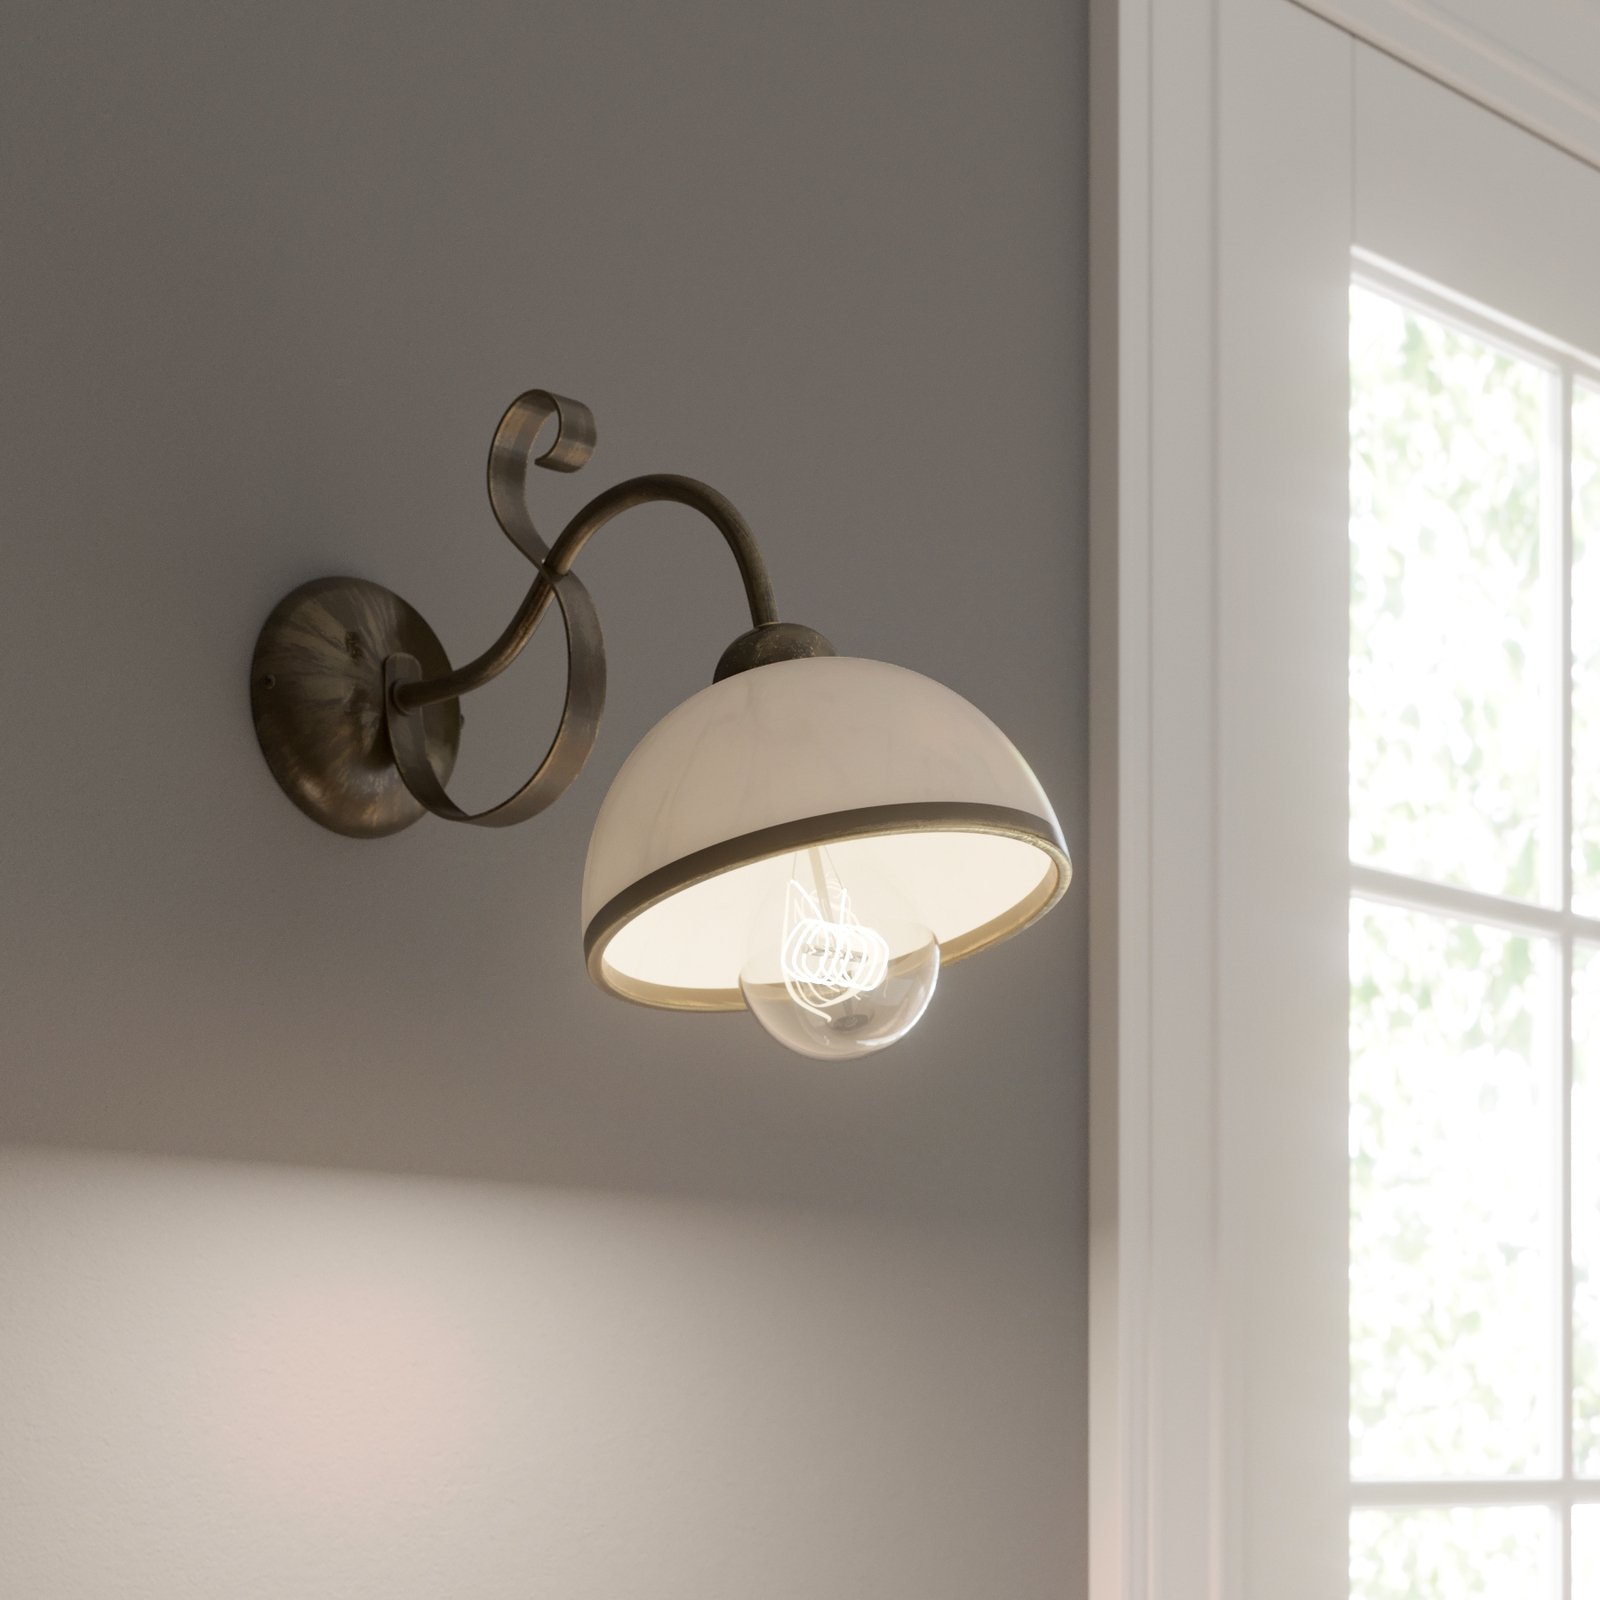 Antica wall light in country house style, 1-bulb